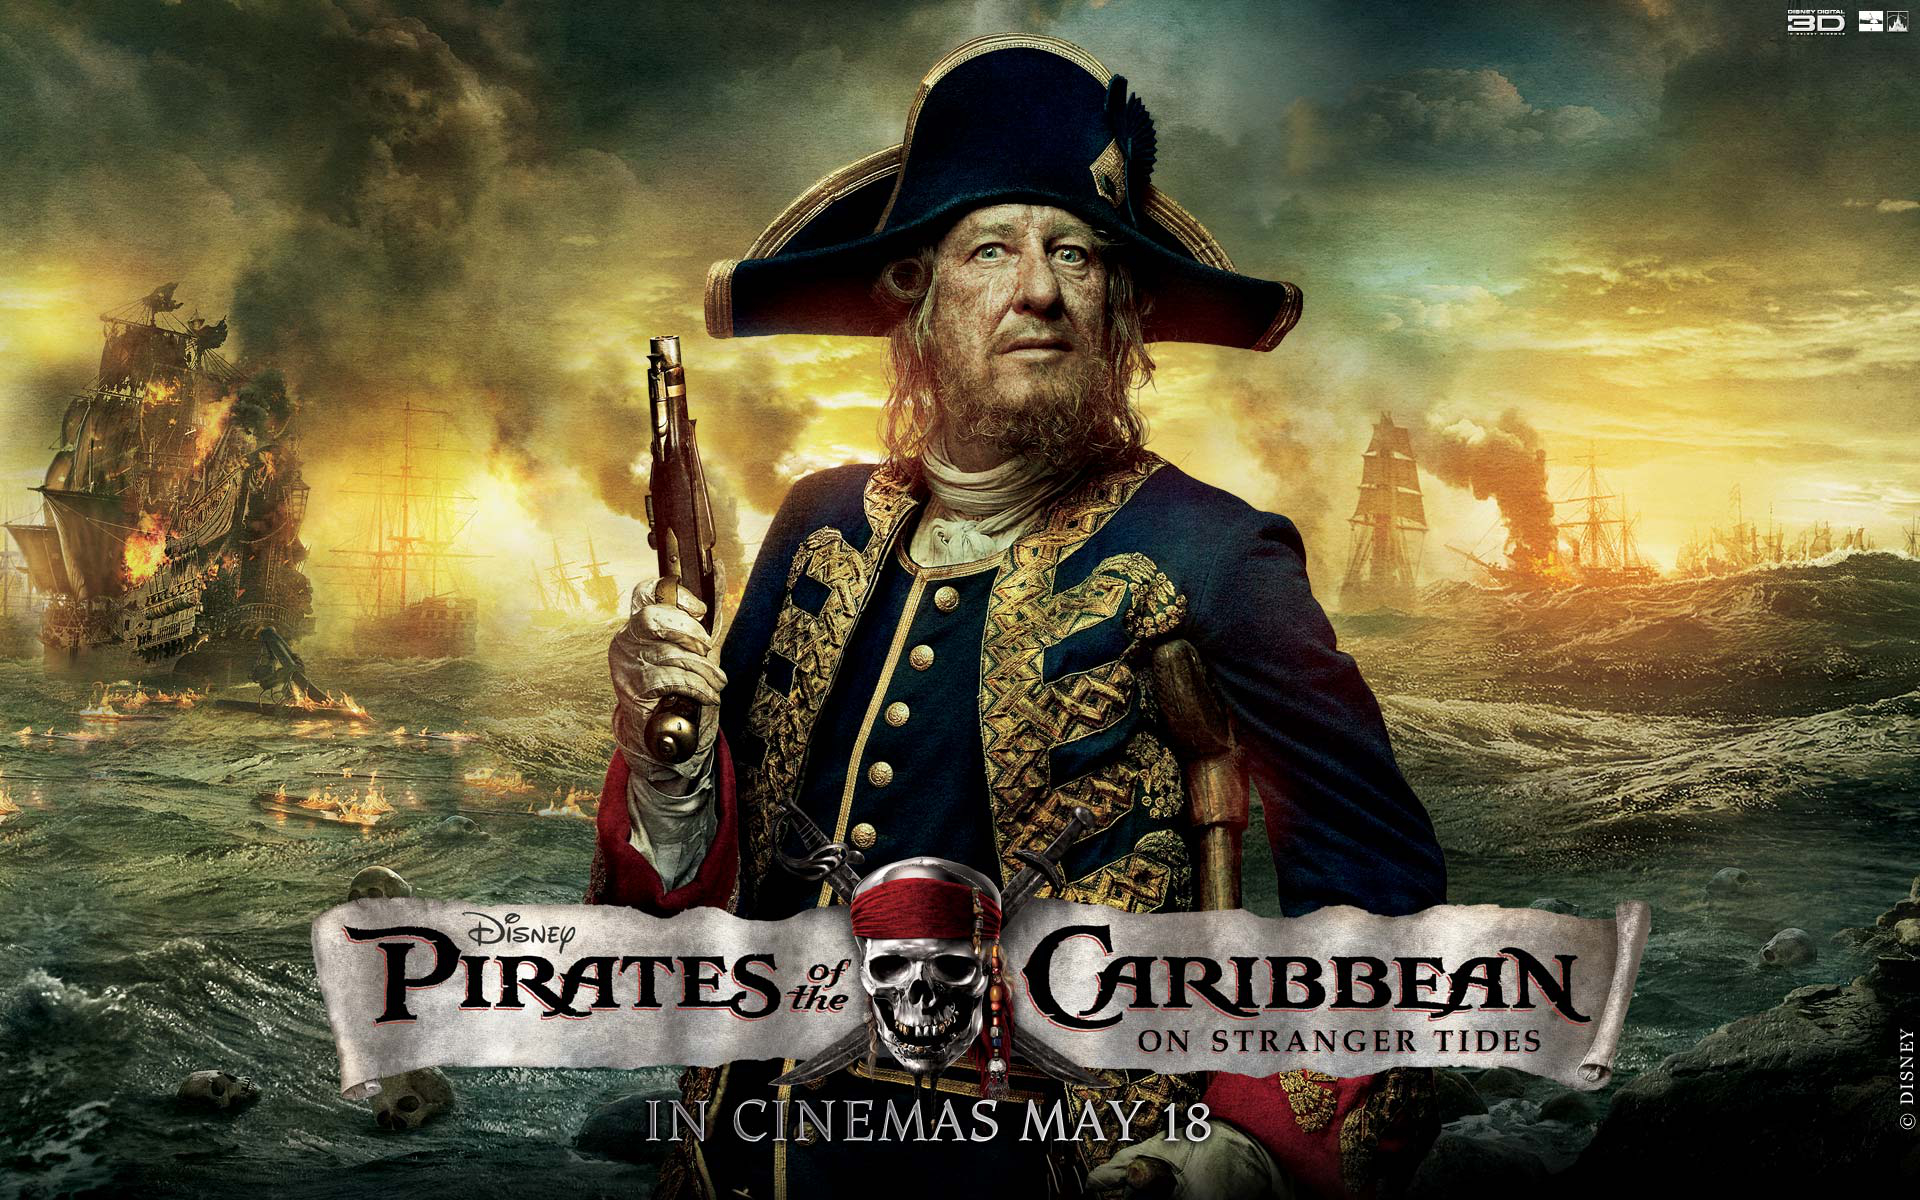 movie, pirates of the caribbean: on stranger tides, geoffrey rush, hector barbossa, pirates of the caribbean